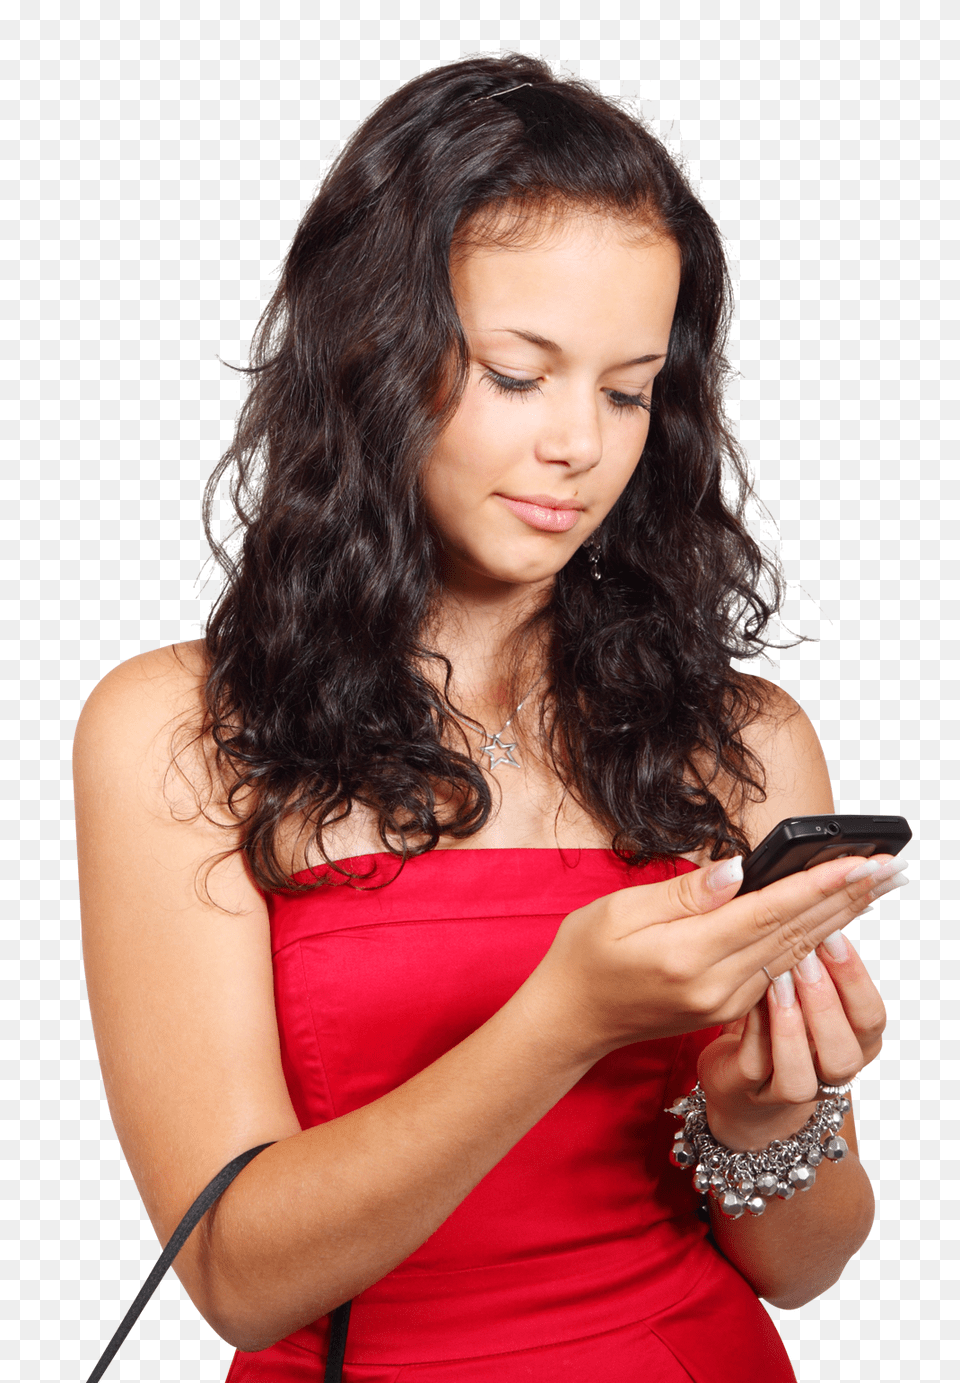 Pngpix Com Young Woman Texting With A Smartphone Image, Person, Hand, Formal Wear, Finger Png